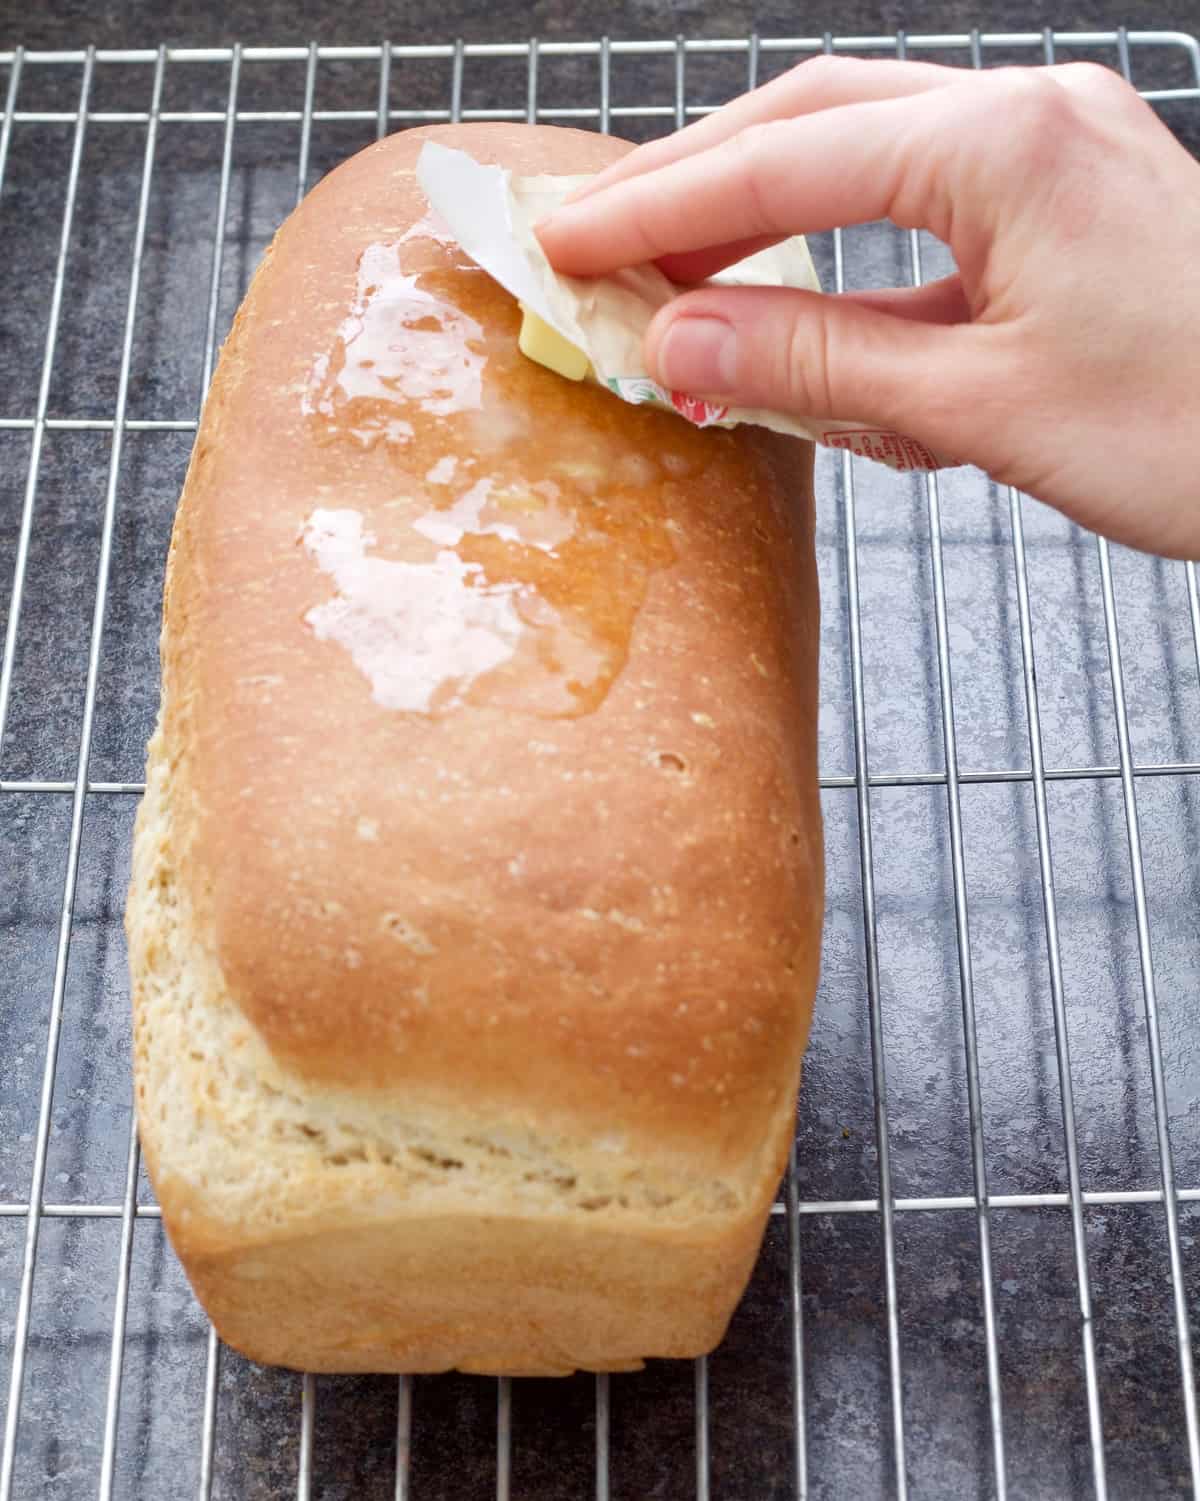 Butter being rubbed over the top of hot bread loaf.